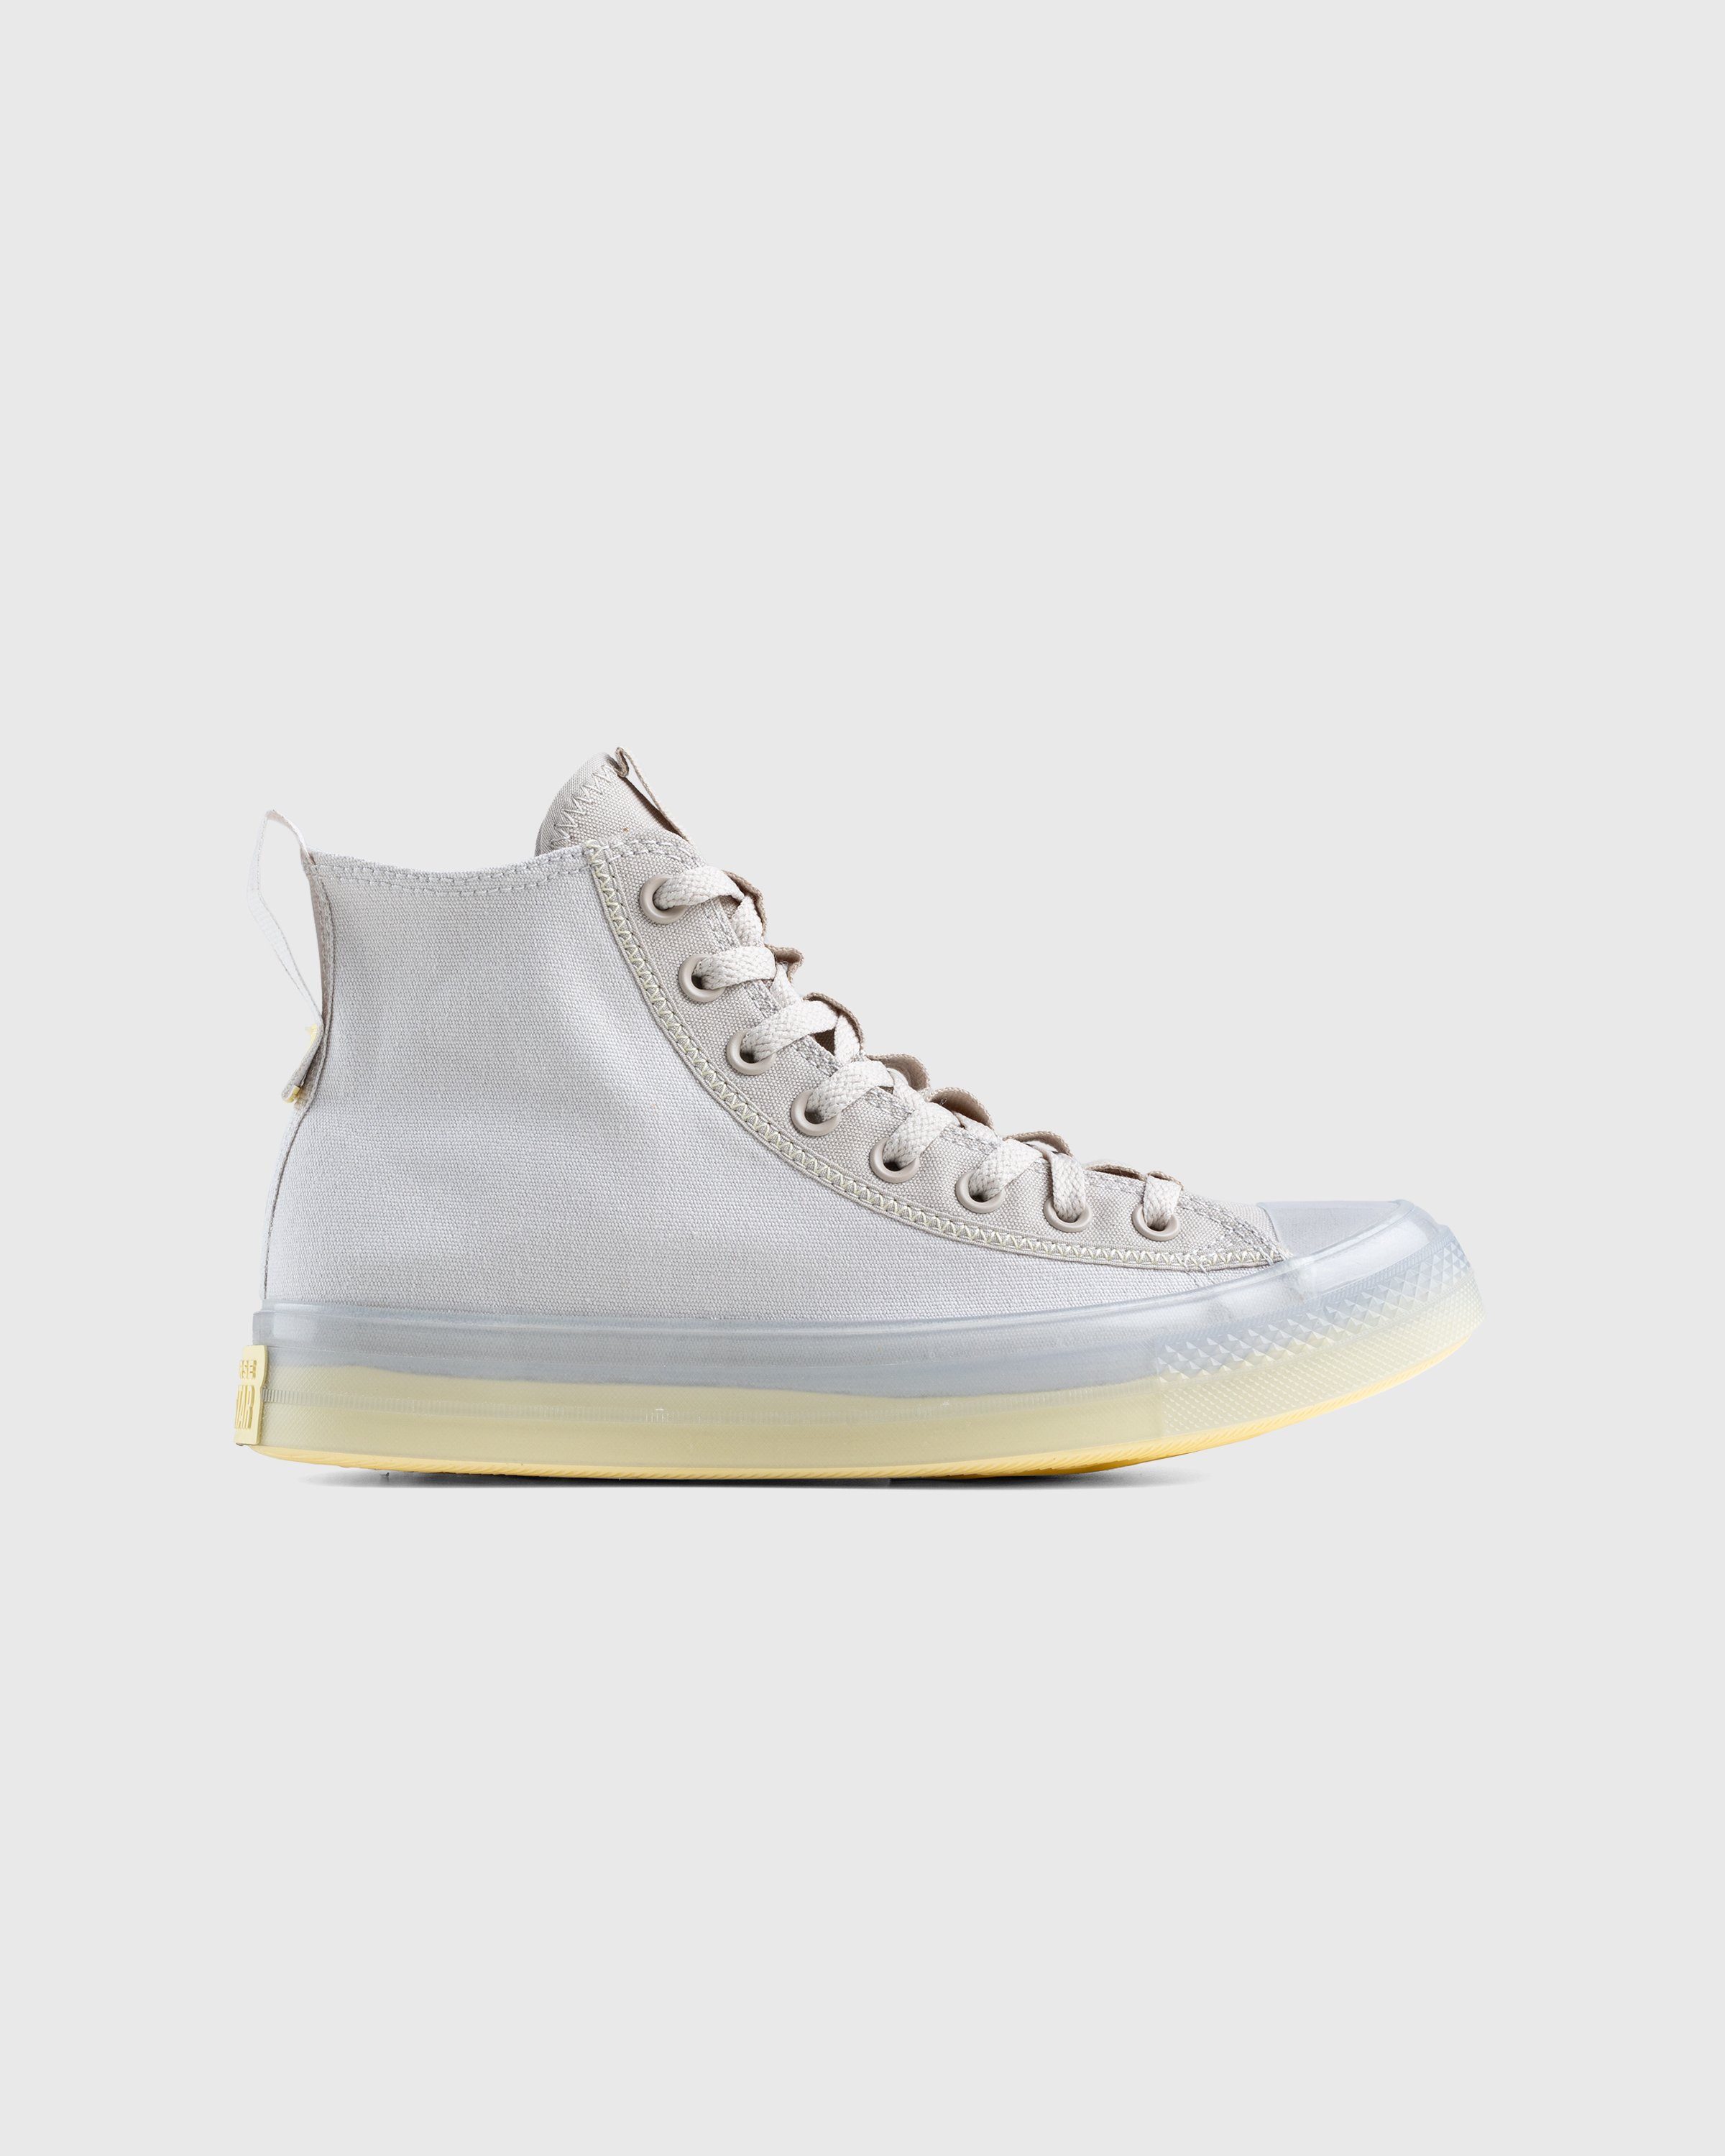 Converse - Chuck Taylor All Star CX Desert Sunset/Pale Putty/Papyrus - Footwear - Grey - Image 1